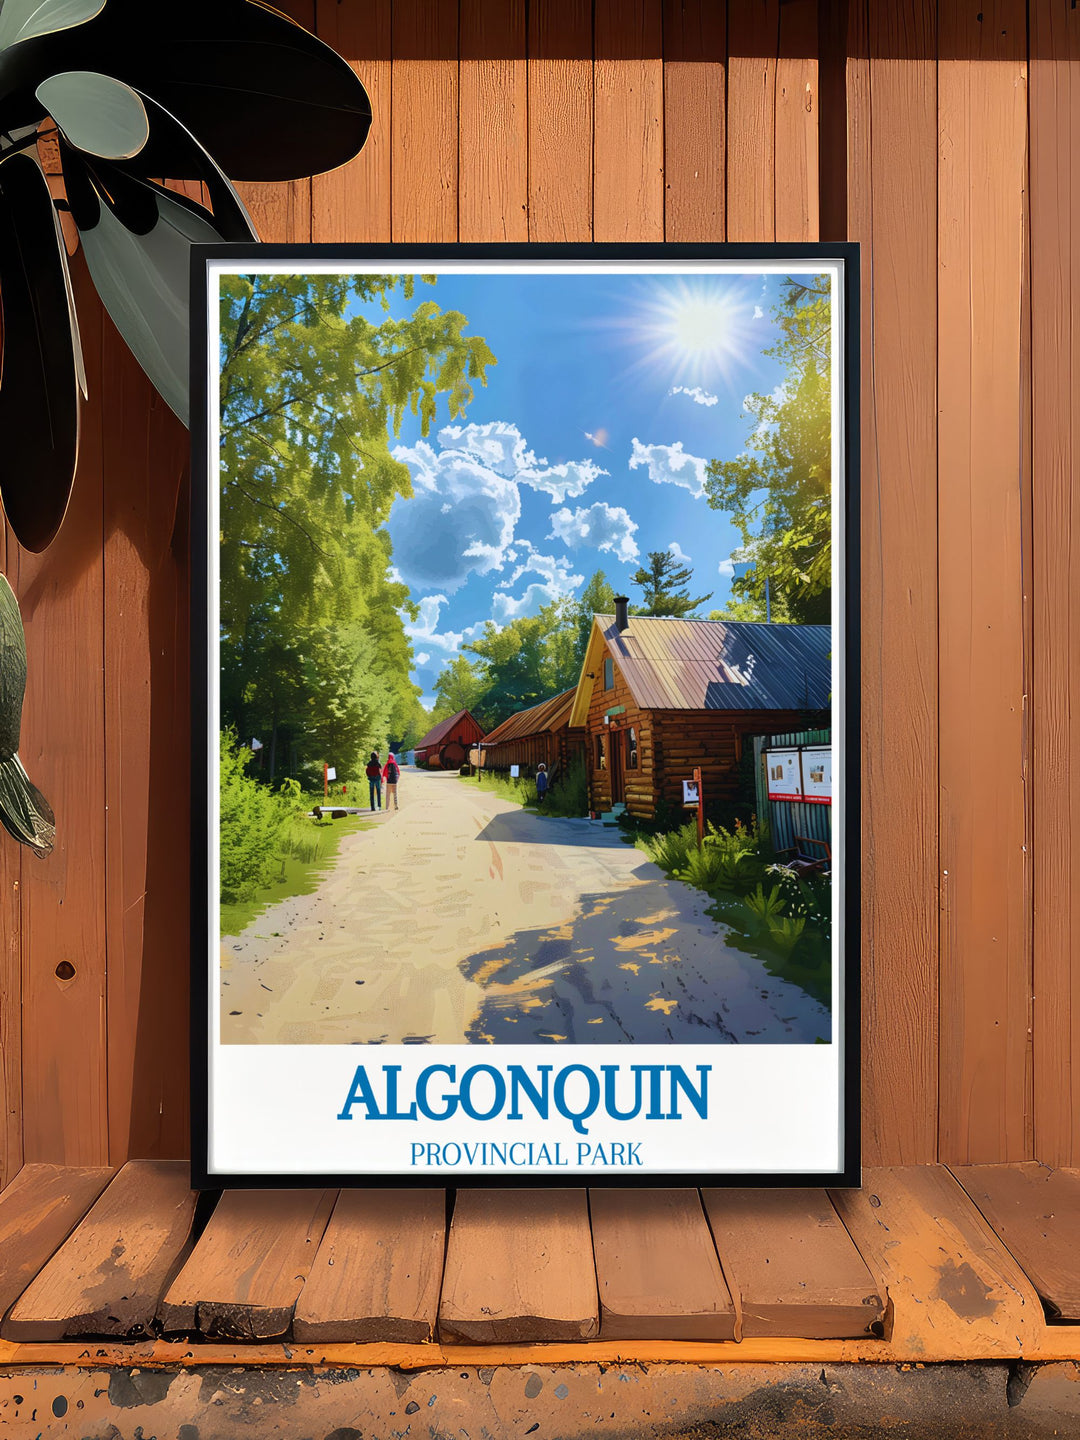 Enhance your home decor with this travel print of Algonquin Logging Museum, capturing the natural beauty and historical depth of Algonquin Provincial Park, ideal for Canada wall art enthusiasts.